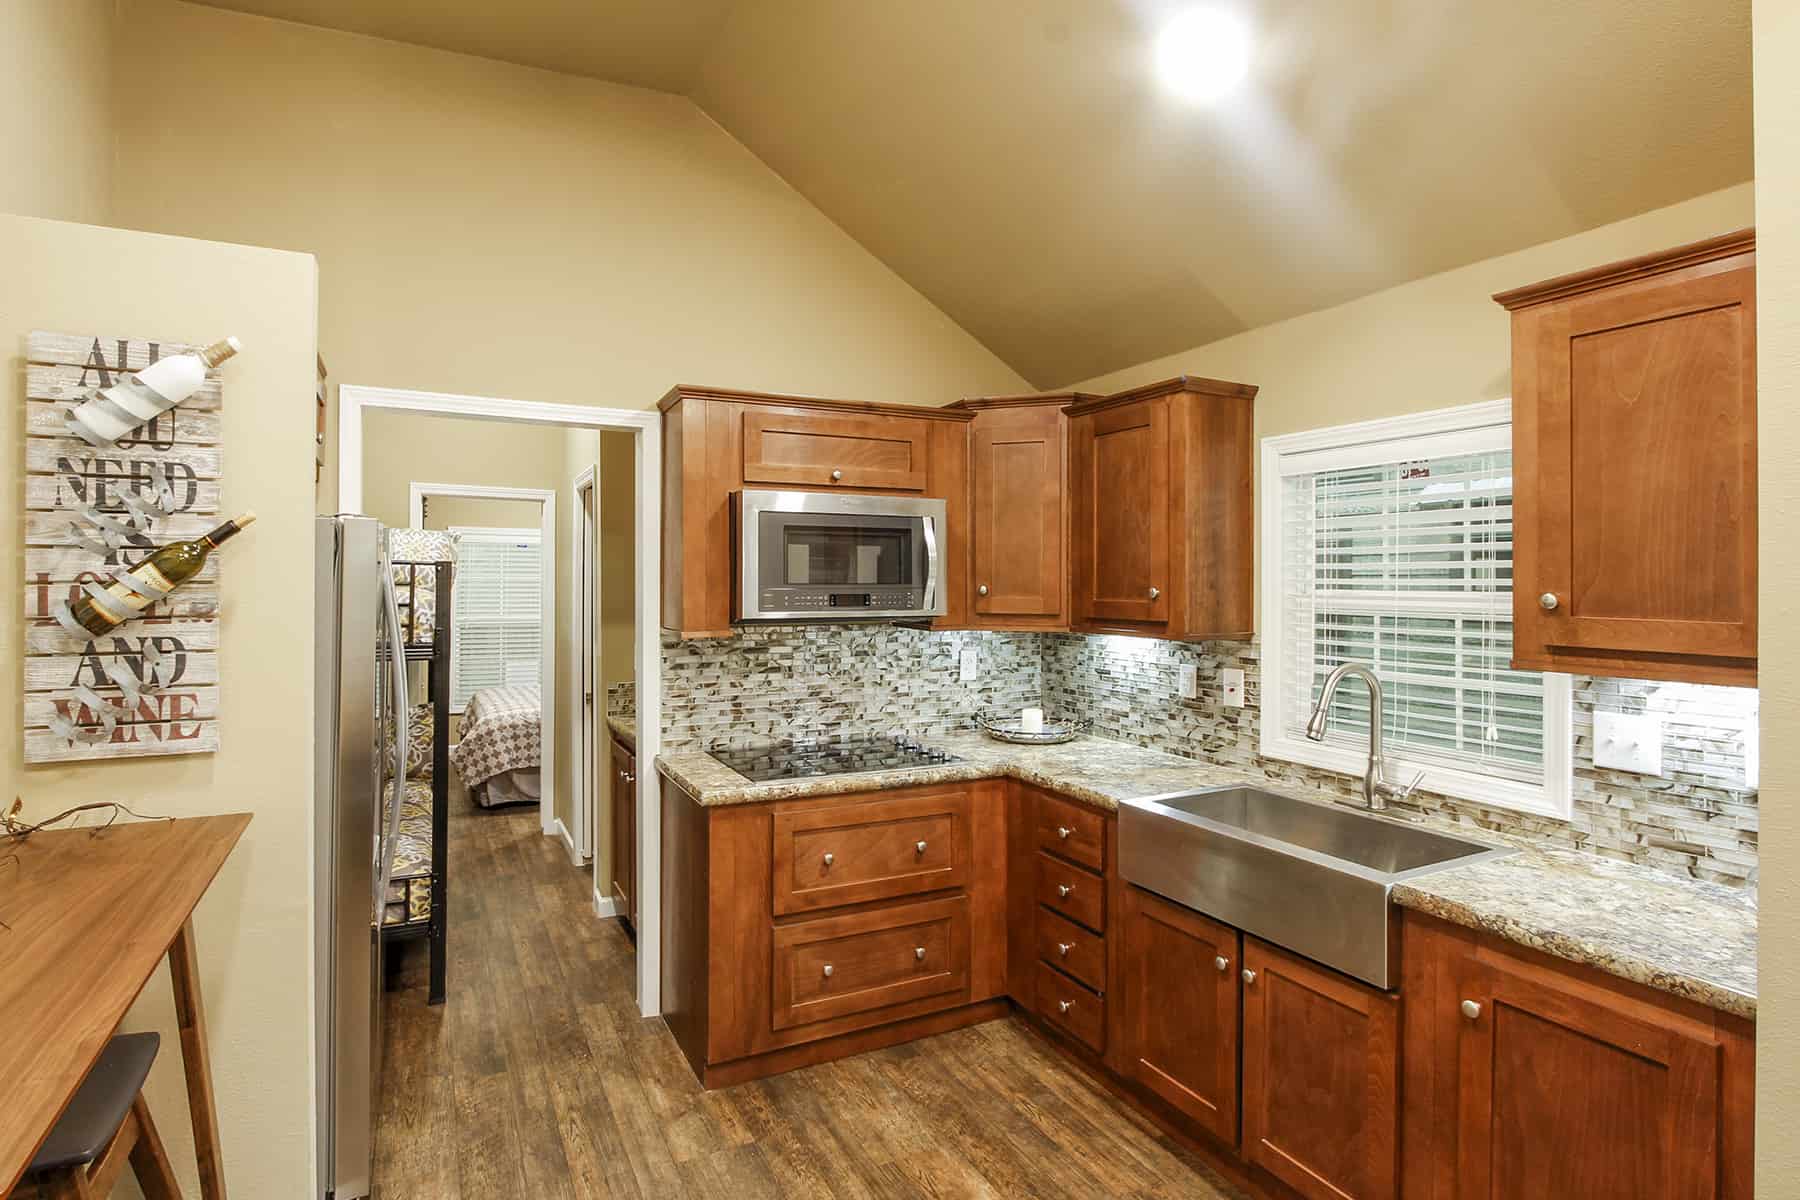 Kitchen of the house model Annecy made by Pratt Homes, Tyler, Texas